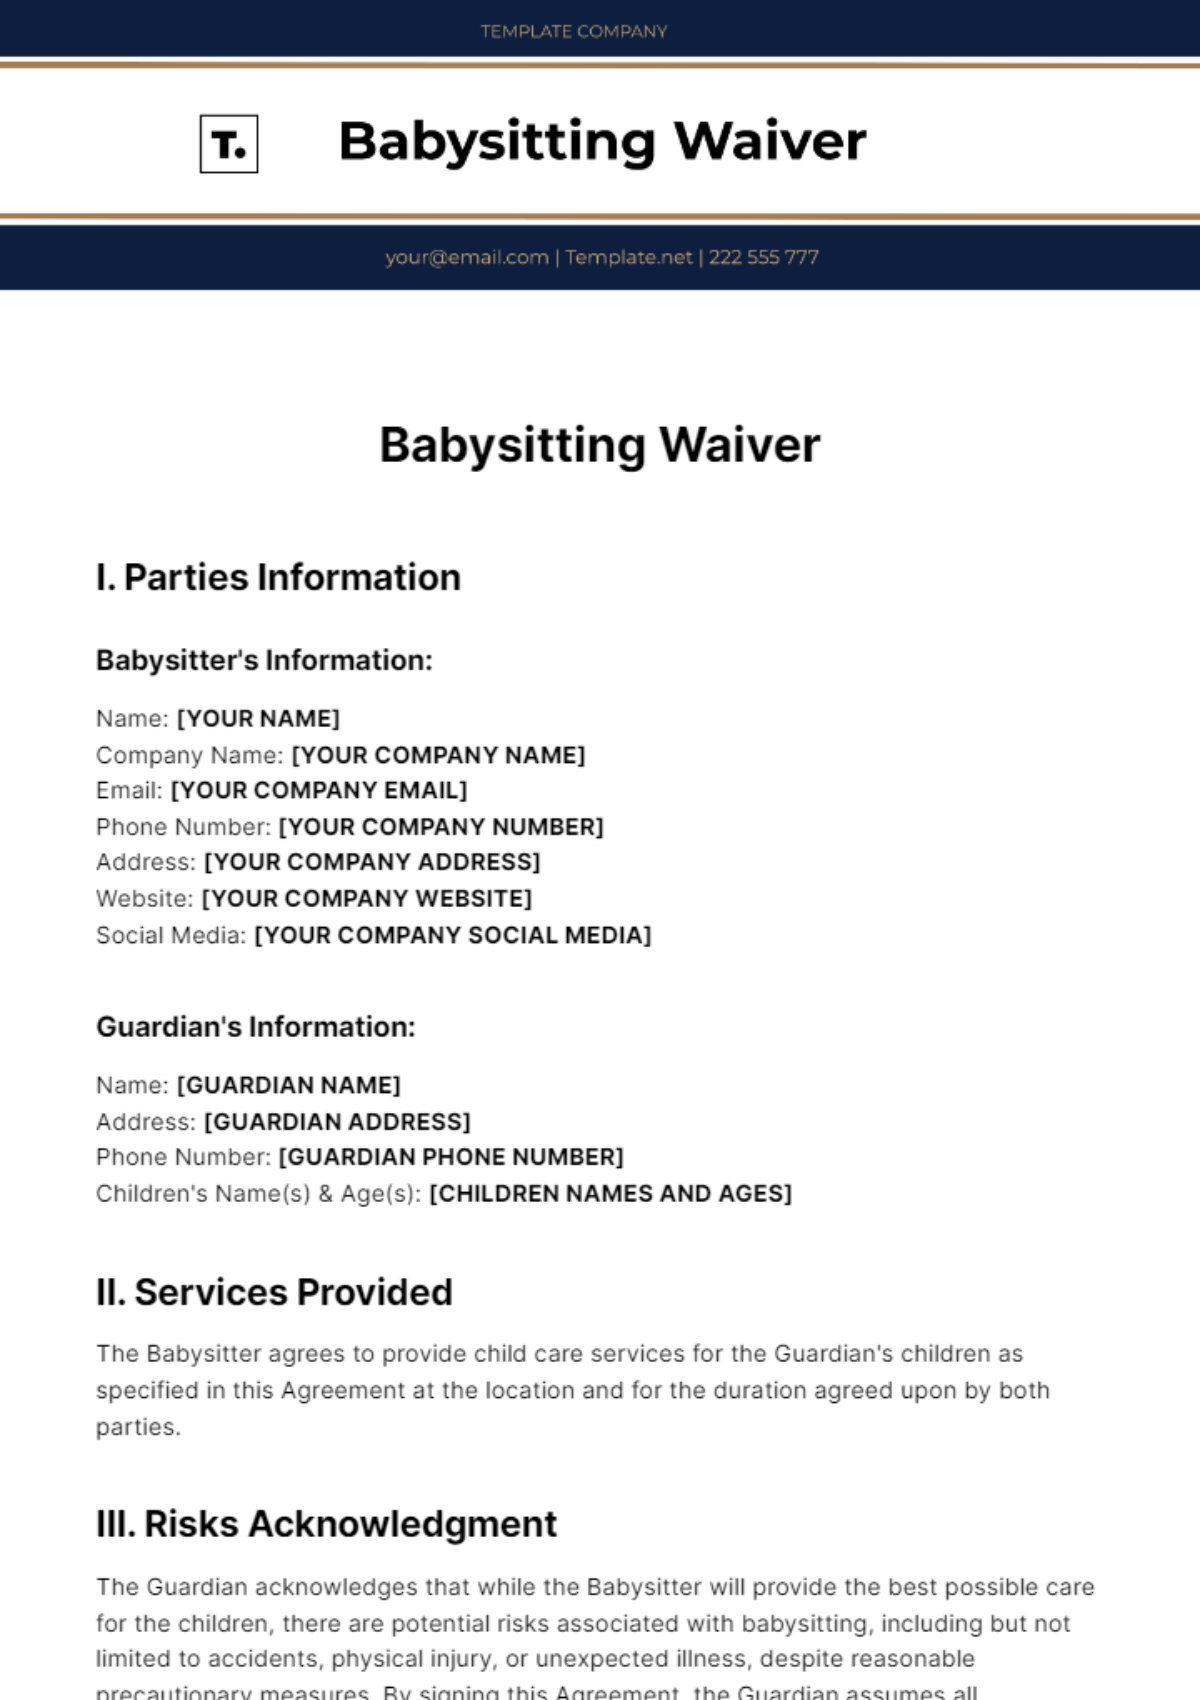 Free Babysitting Waiver Template